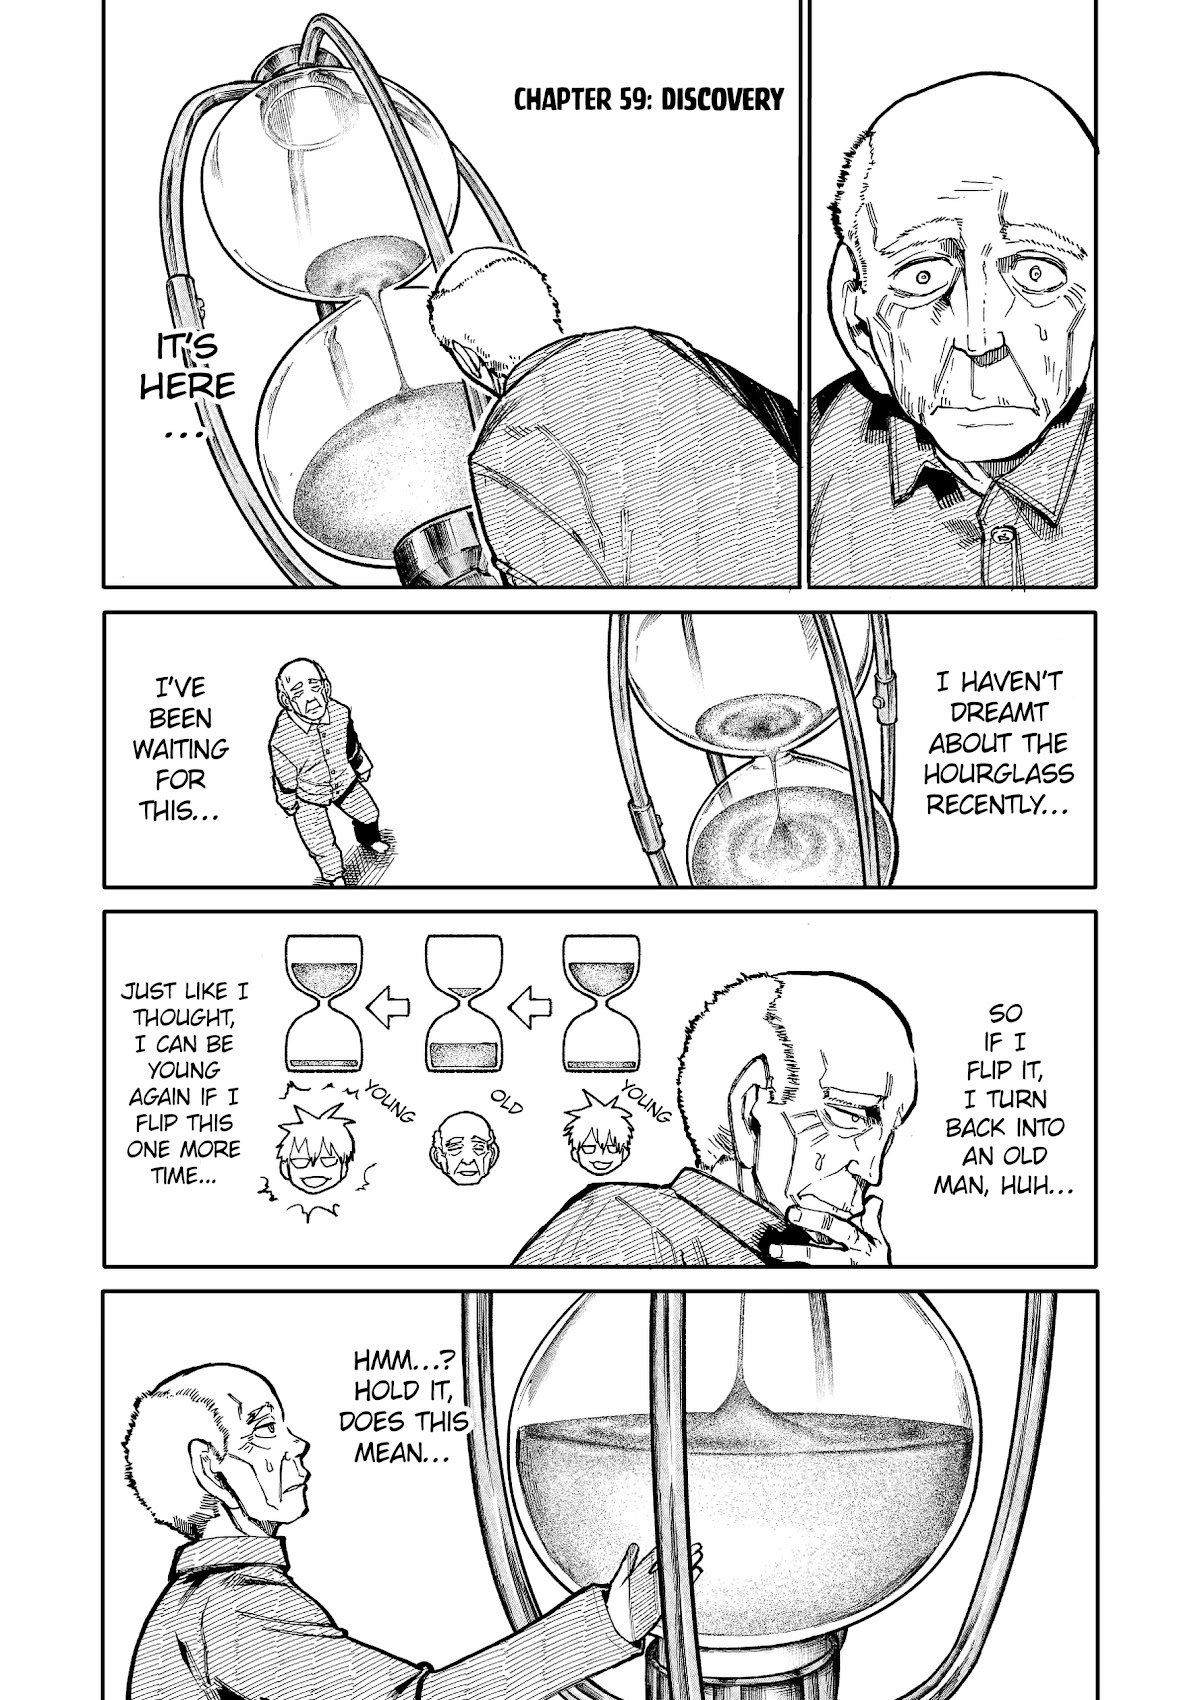 A Story About A Grandpa and Grandma who Returned Back to their Youth. Chapter 59